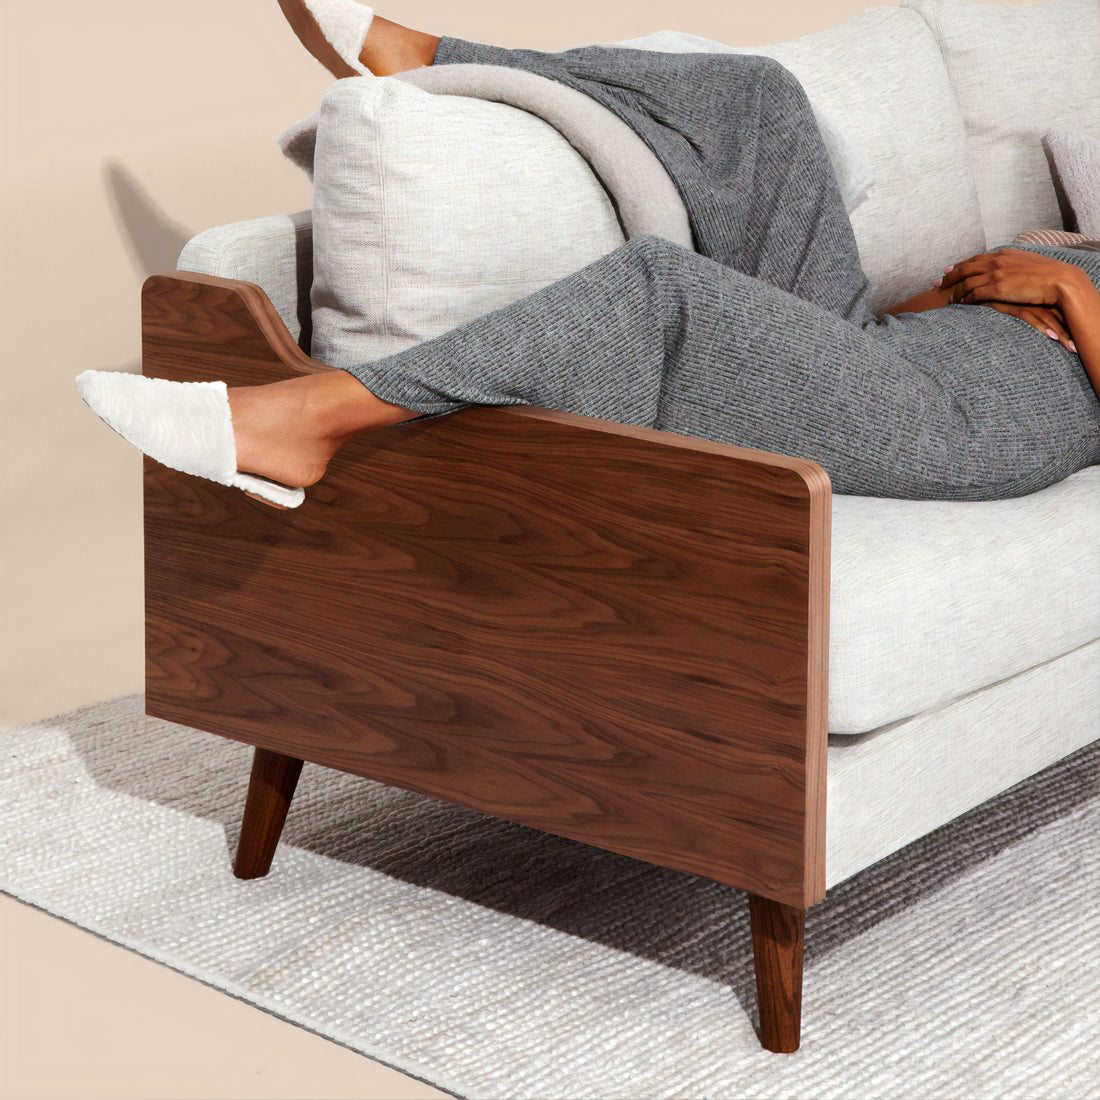 Cozy Sustainable Essentials for the Homebody in Your Life | Verte Mode